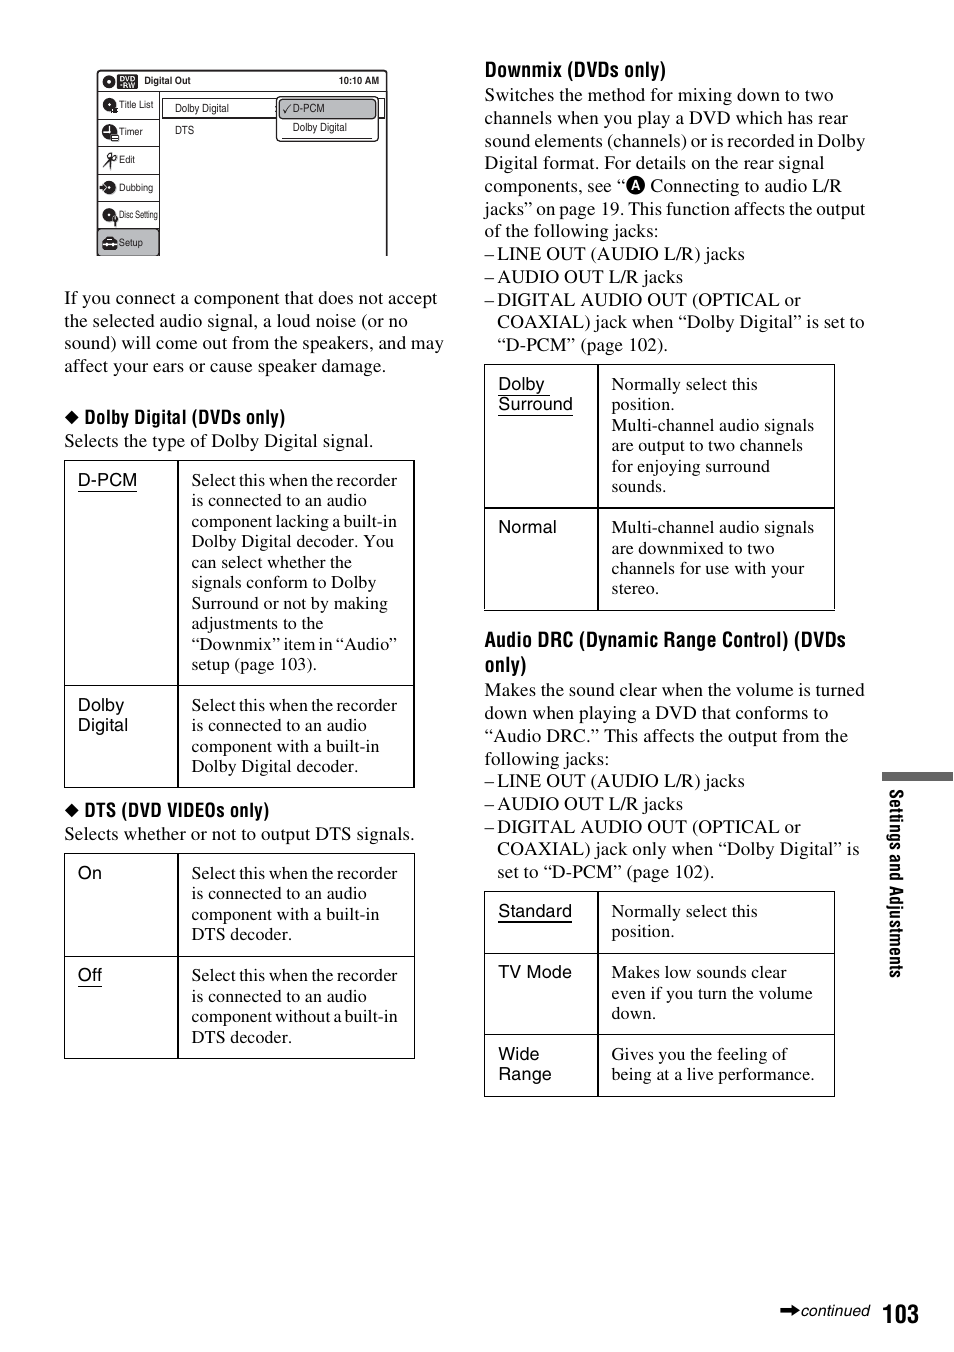 Downmix (dvds only), Audio drc (dynamic range control) (dvds only) | Sony RDR-VX521 User Manual | Page 103 / 132